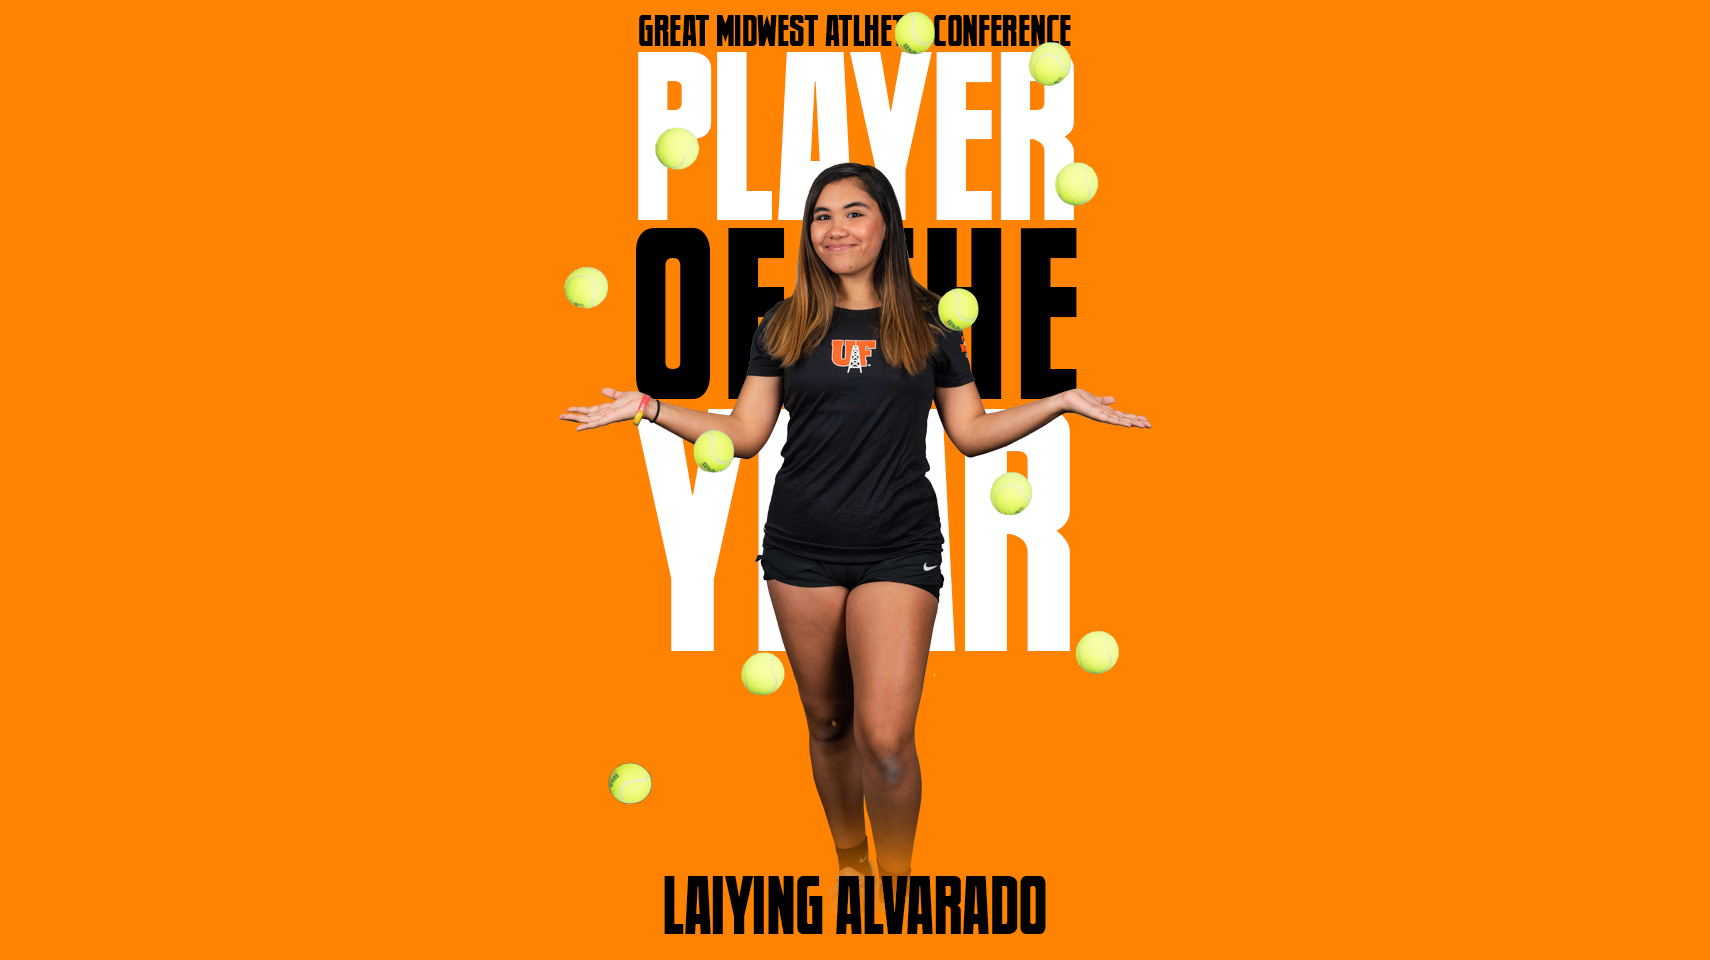 Women's tennis player of the year